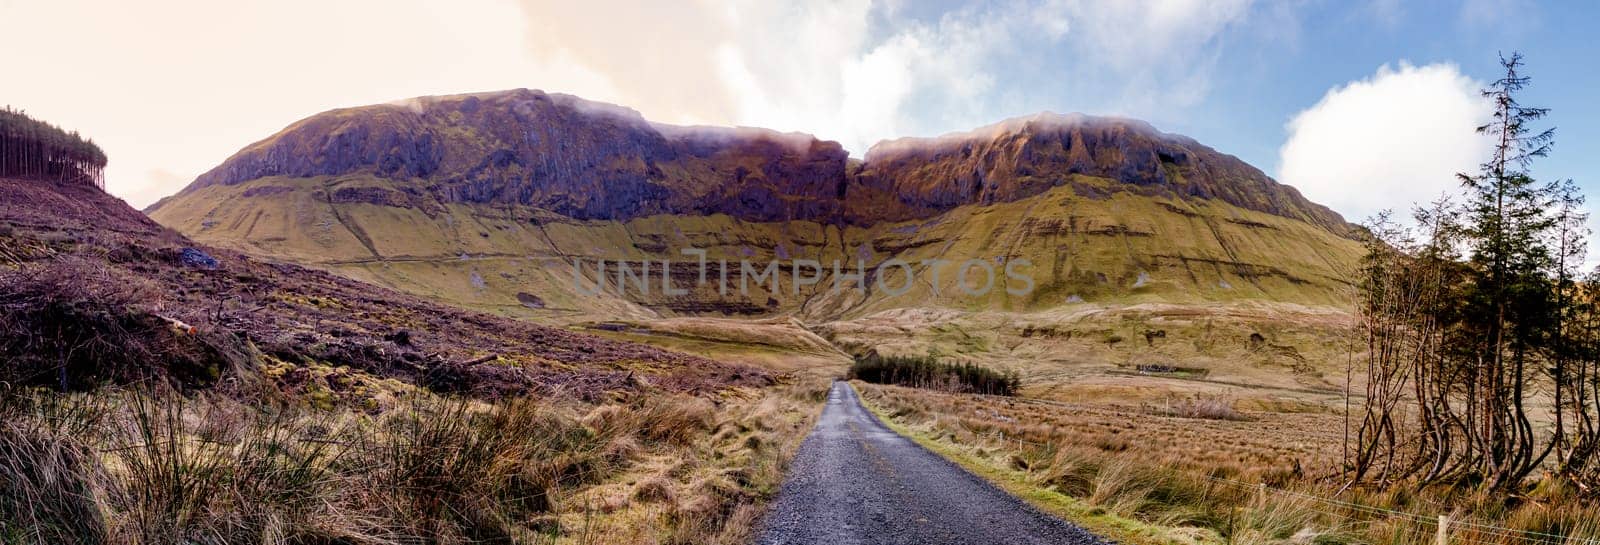 Panorama of the Gleniff Horseshoe in County Leitrim - Ireland by TLC_Automation